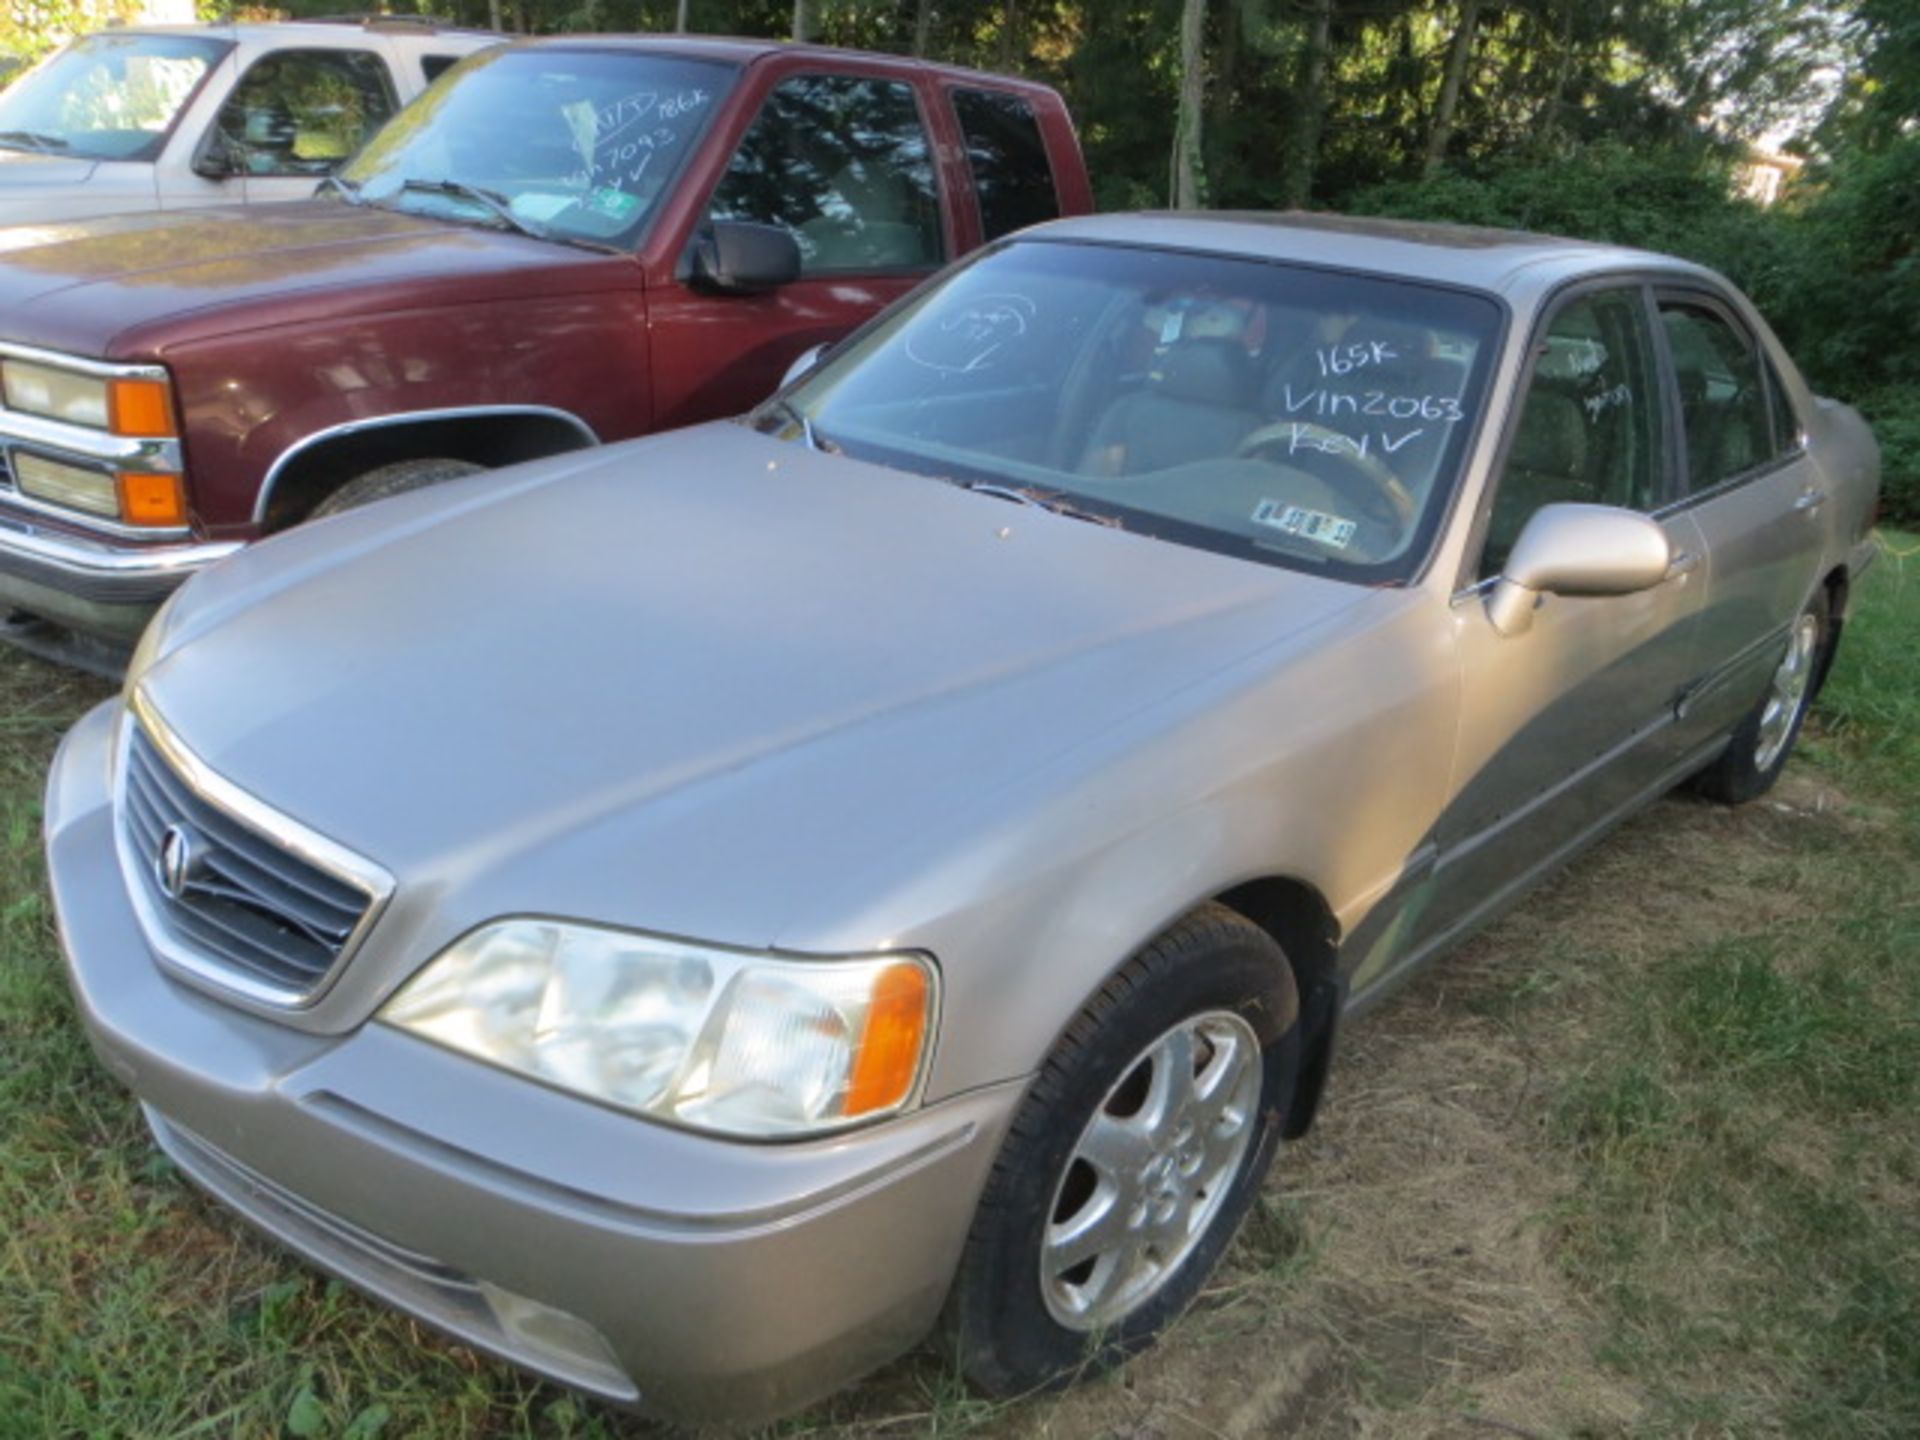 2002 Acura-NEED IGNITION 165000 MILES,VIN JH4KA96592C012063, VEHICLE BEING SOLD WITH SALVAGE TITLE